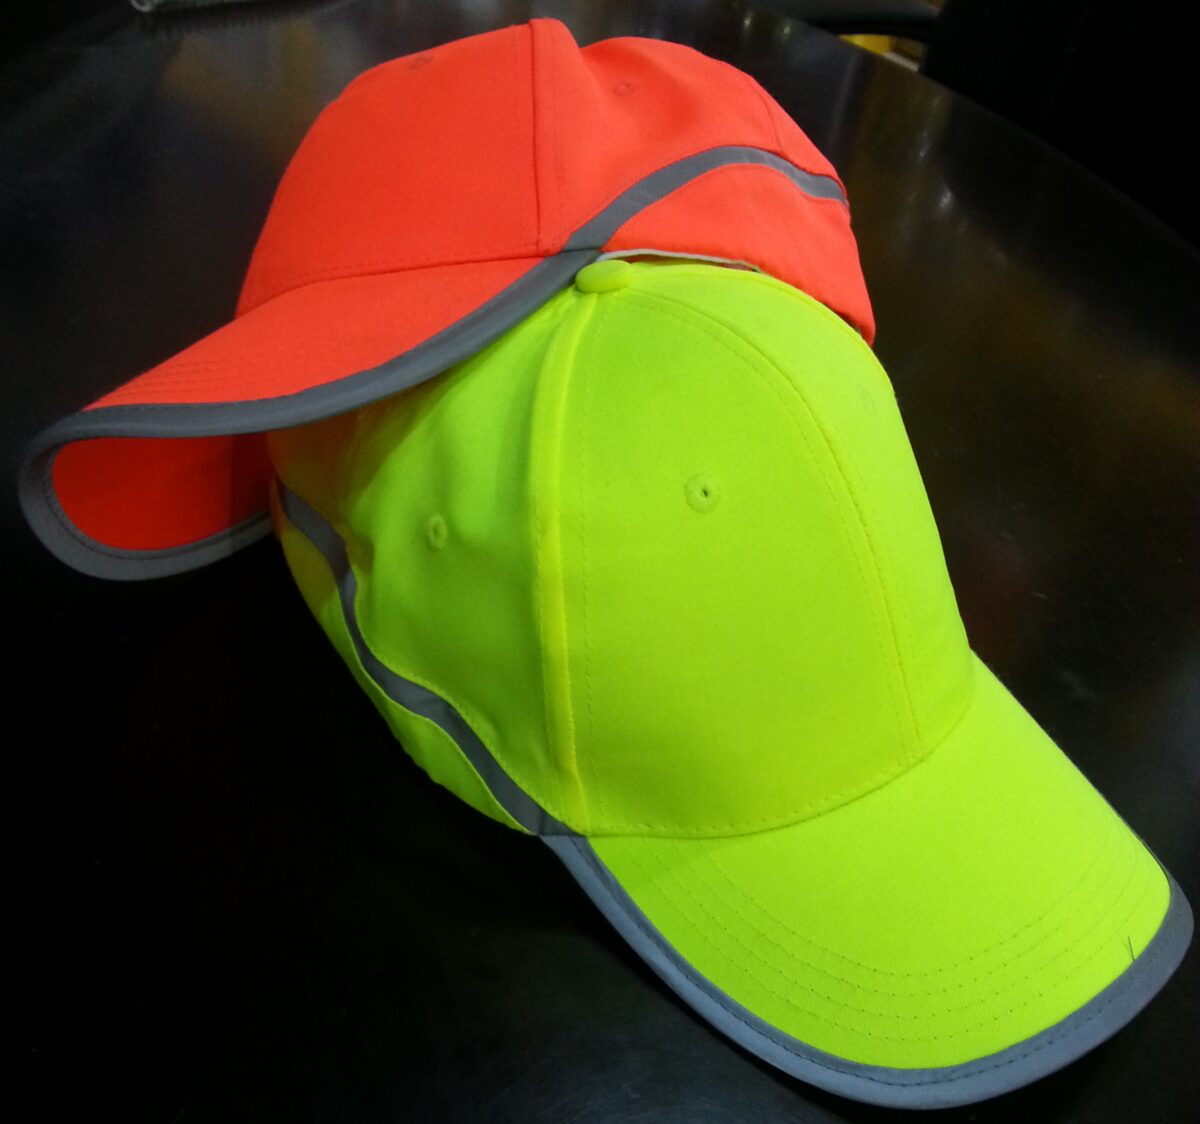  Fluorescent Reflective Cap -High Visibility Safety Unstructured Cap With Reflective Stripes Fluorescent